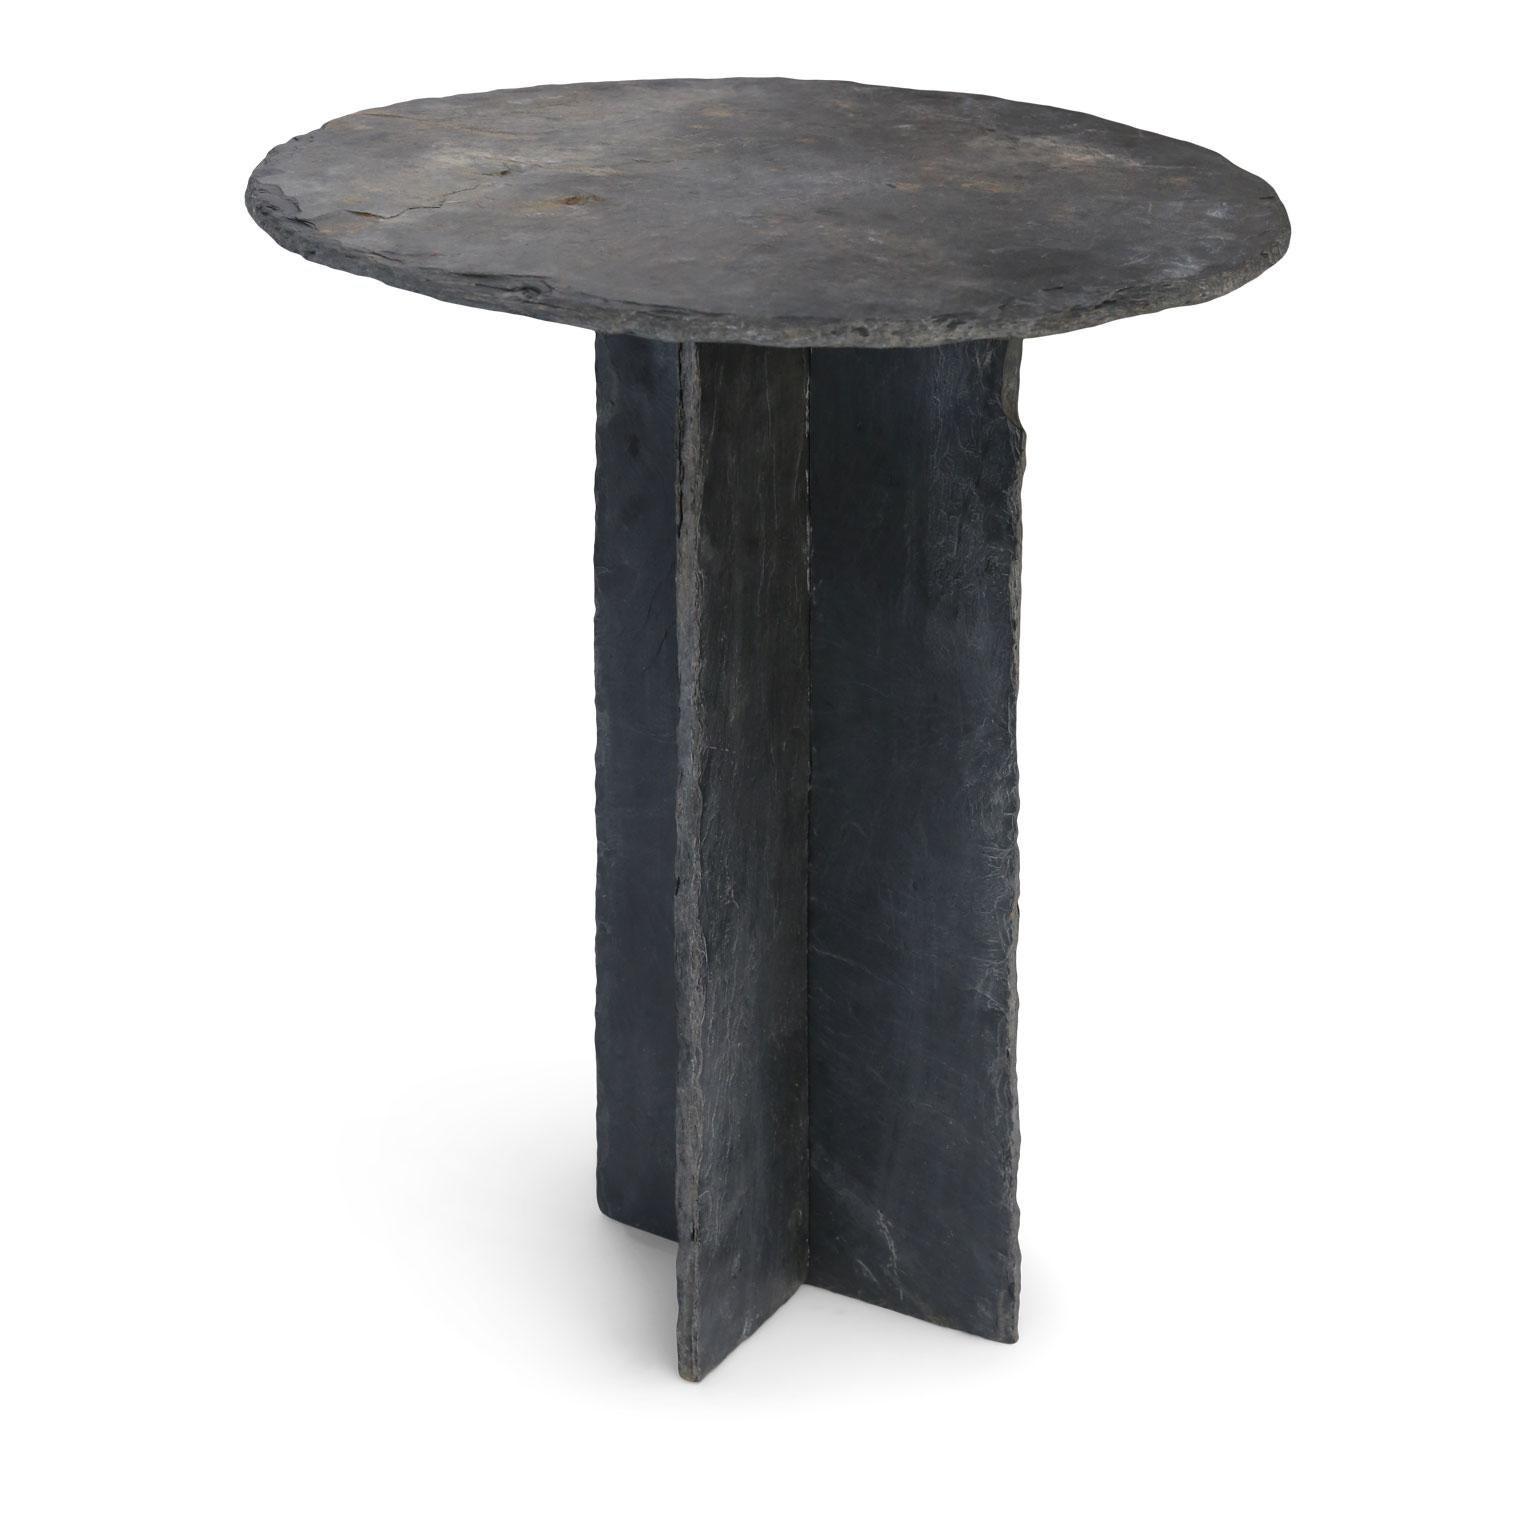 Two French tables d'ardoise: vintage round top slate side tables. Each slate top rests upon a two-piece slate base that crosses and connects in its center.